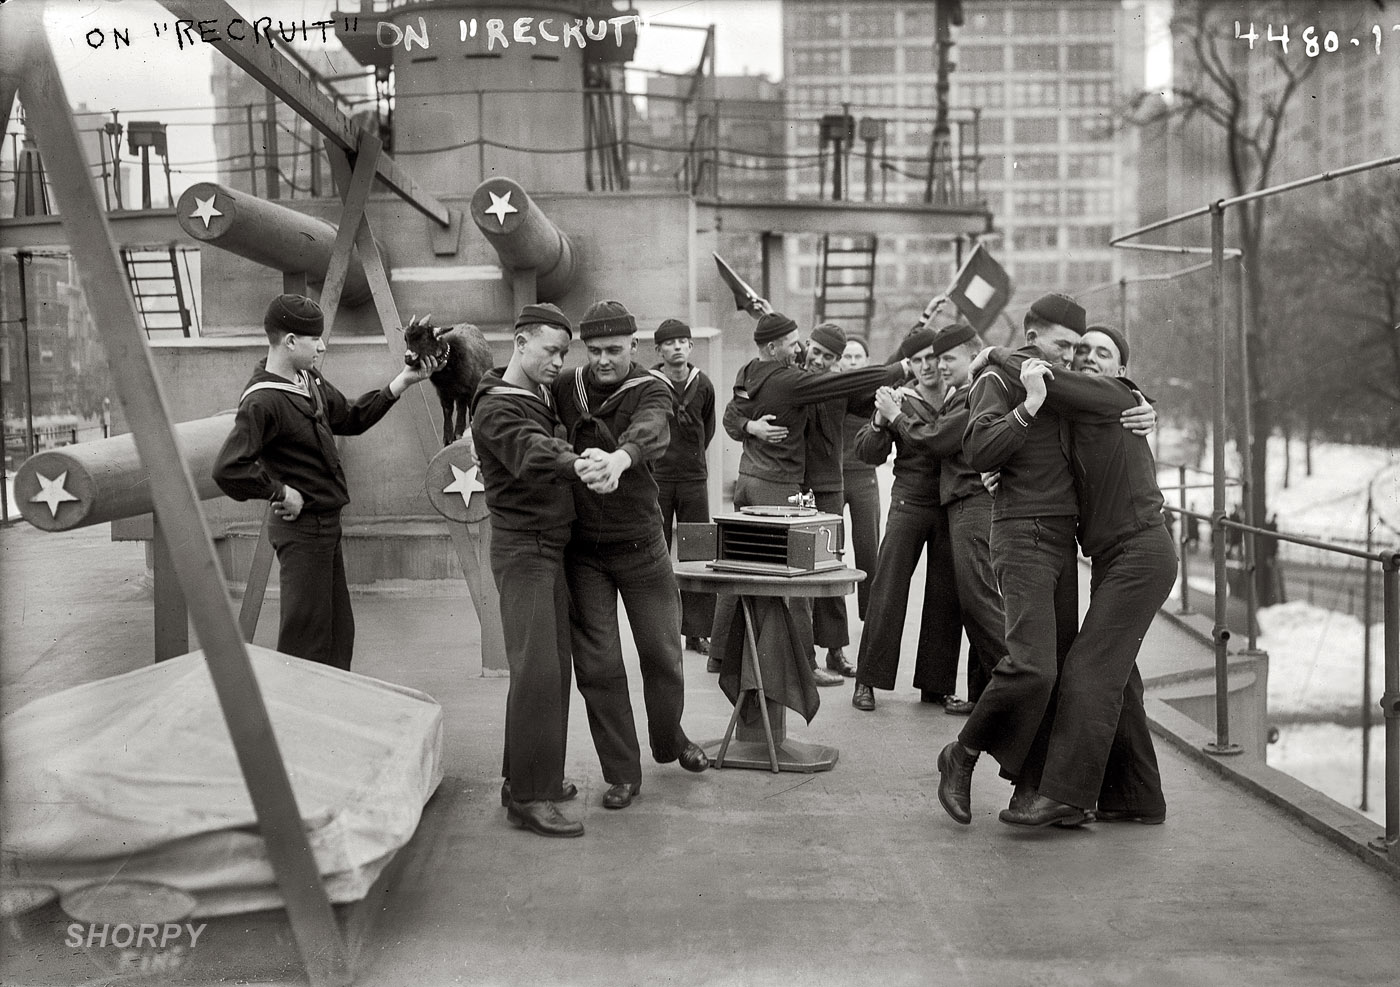 New York, 1917. "Aboard the Recruit." Our first glimpse of life on the "landship" U.S.S. Recruit, a wooden destroyer set up in Union Square as a Navy recruiting station. For our marooned sailors there was a phonograph, dancing and a pet goat. 5x7 glass negative, George Grantham Bain Collection. View full size.